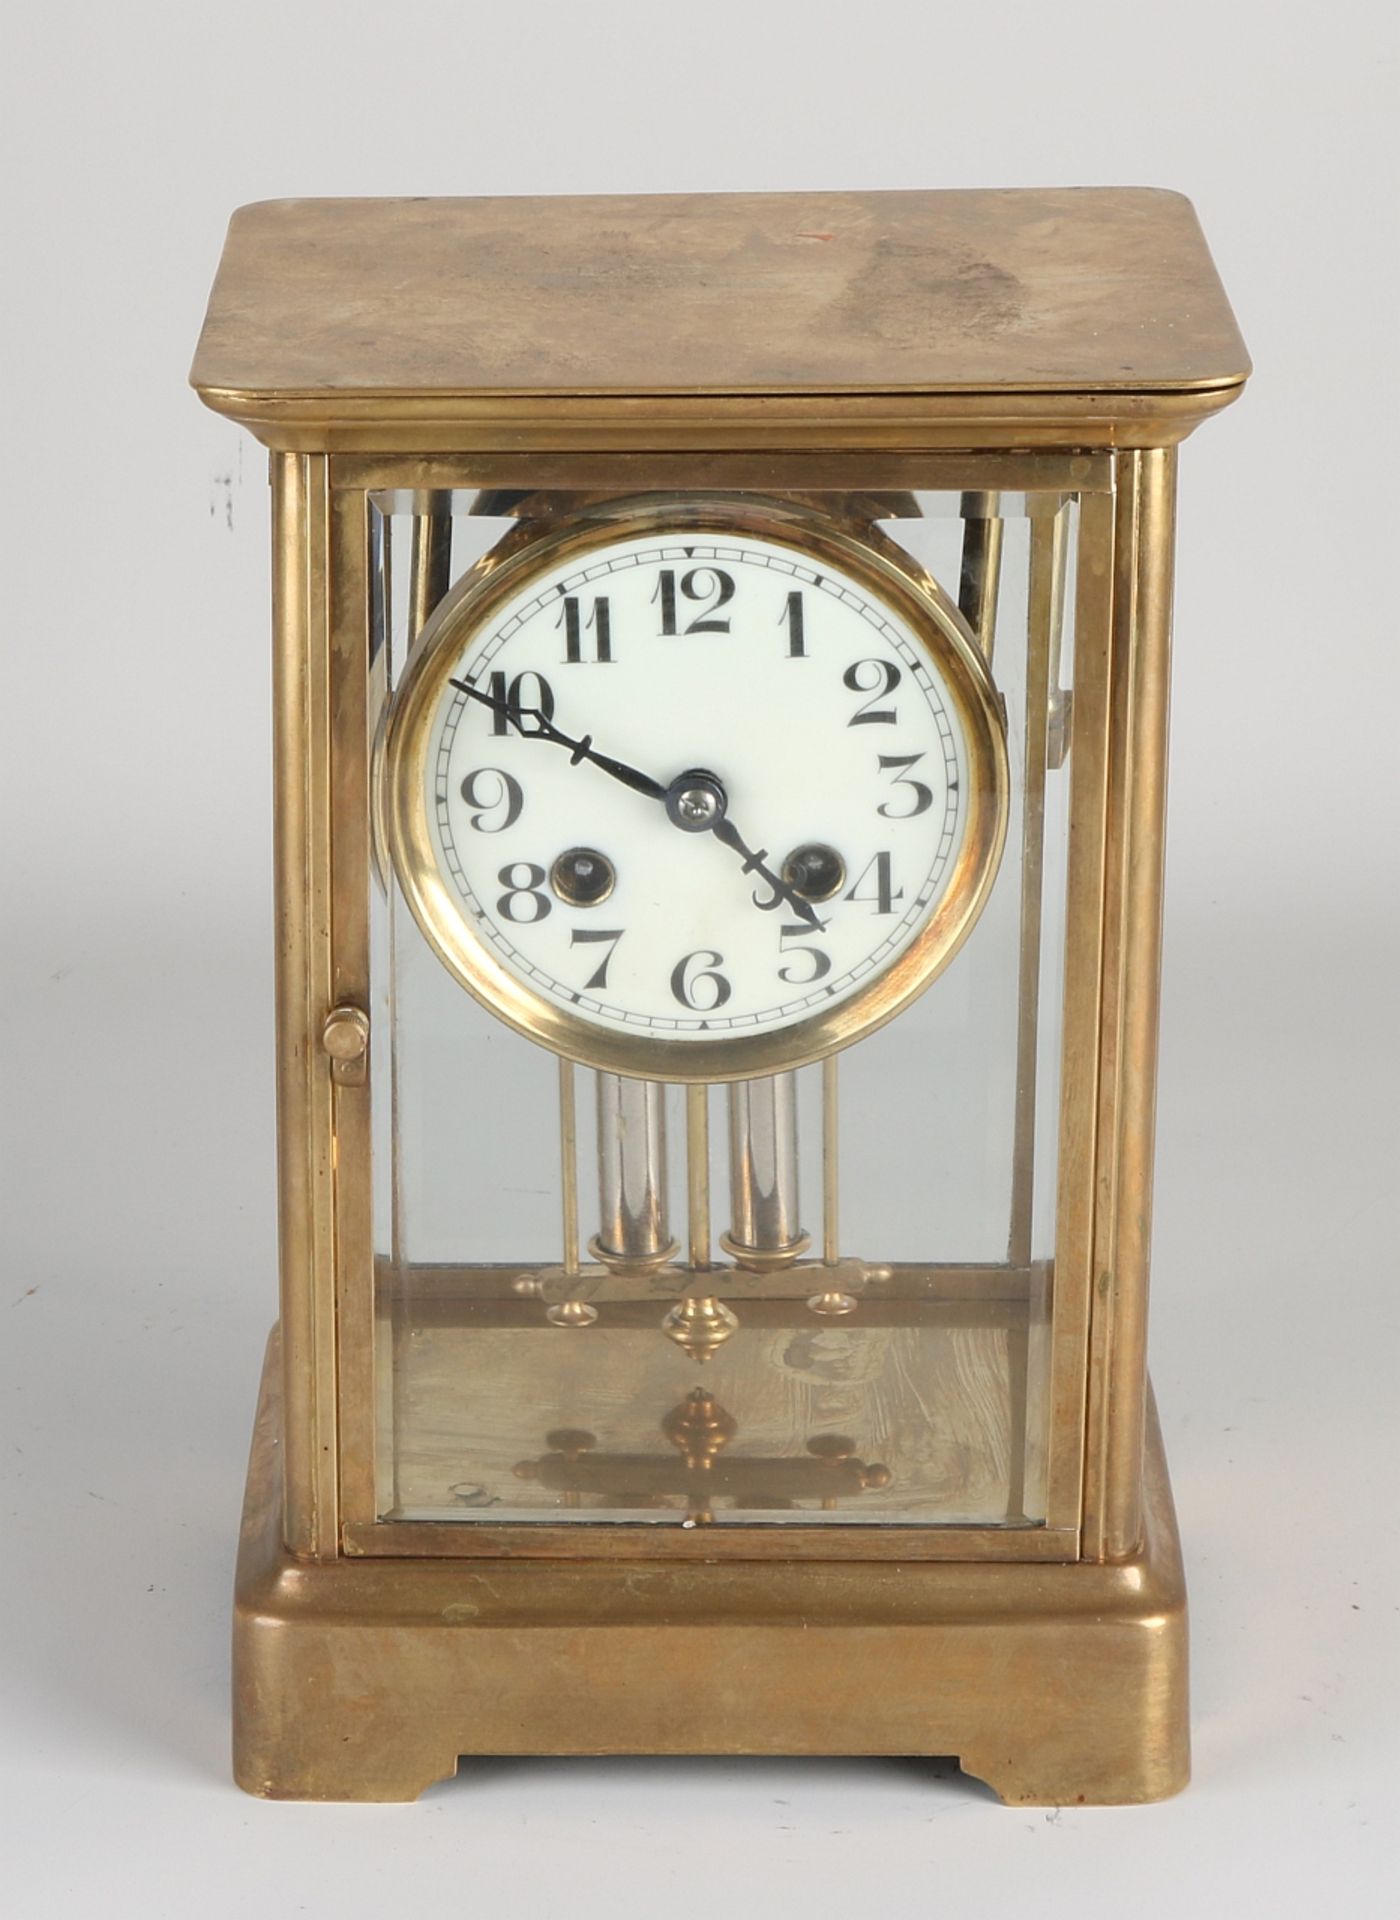 Antique French glass mantel clock, 1900